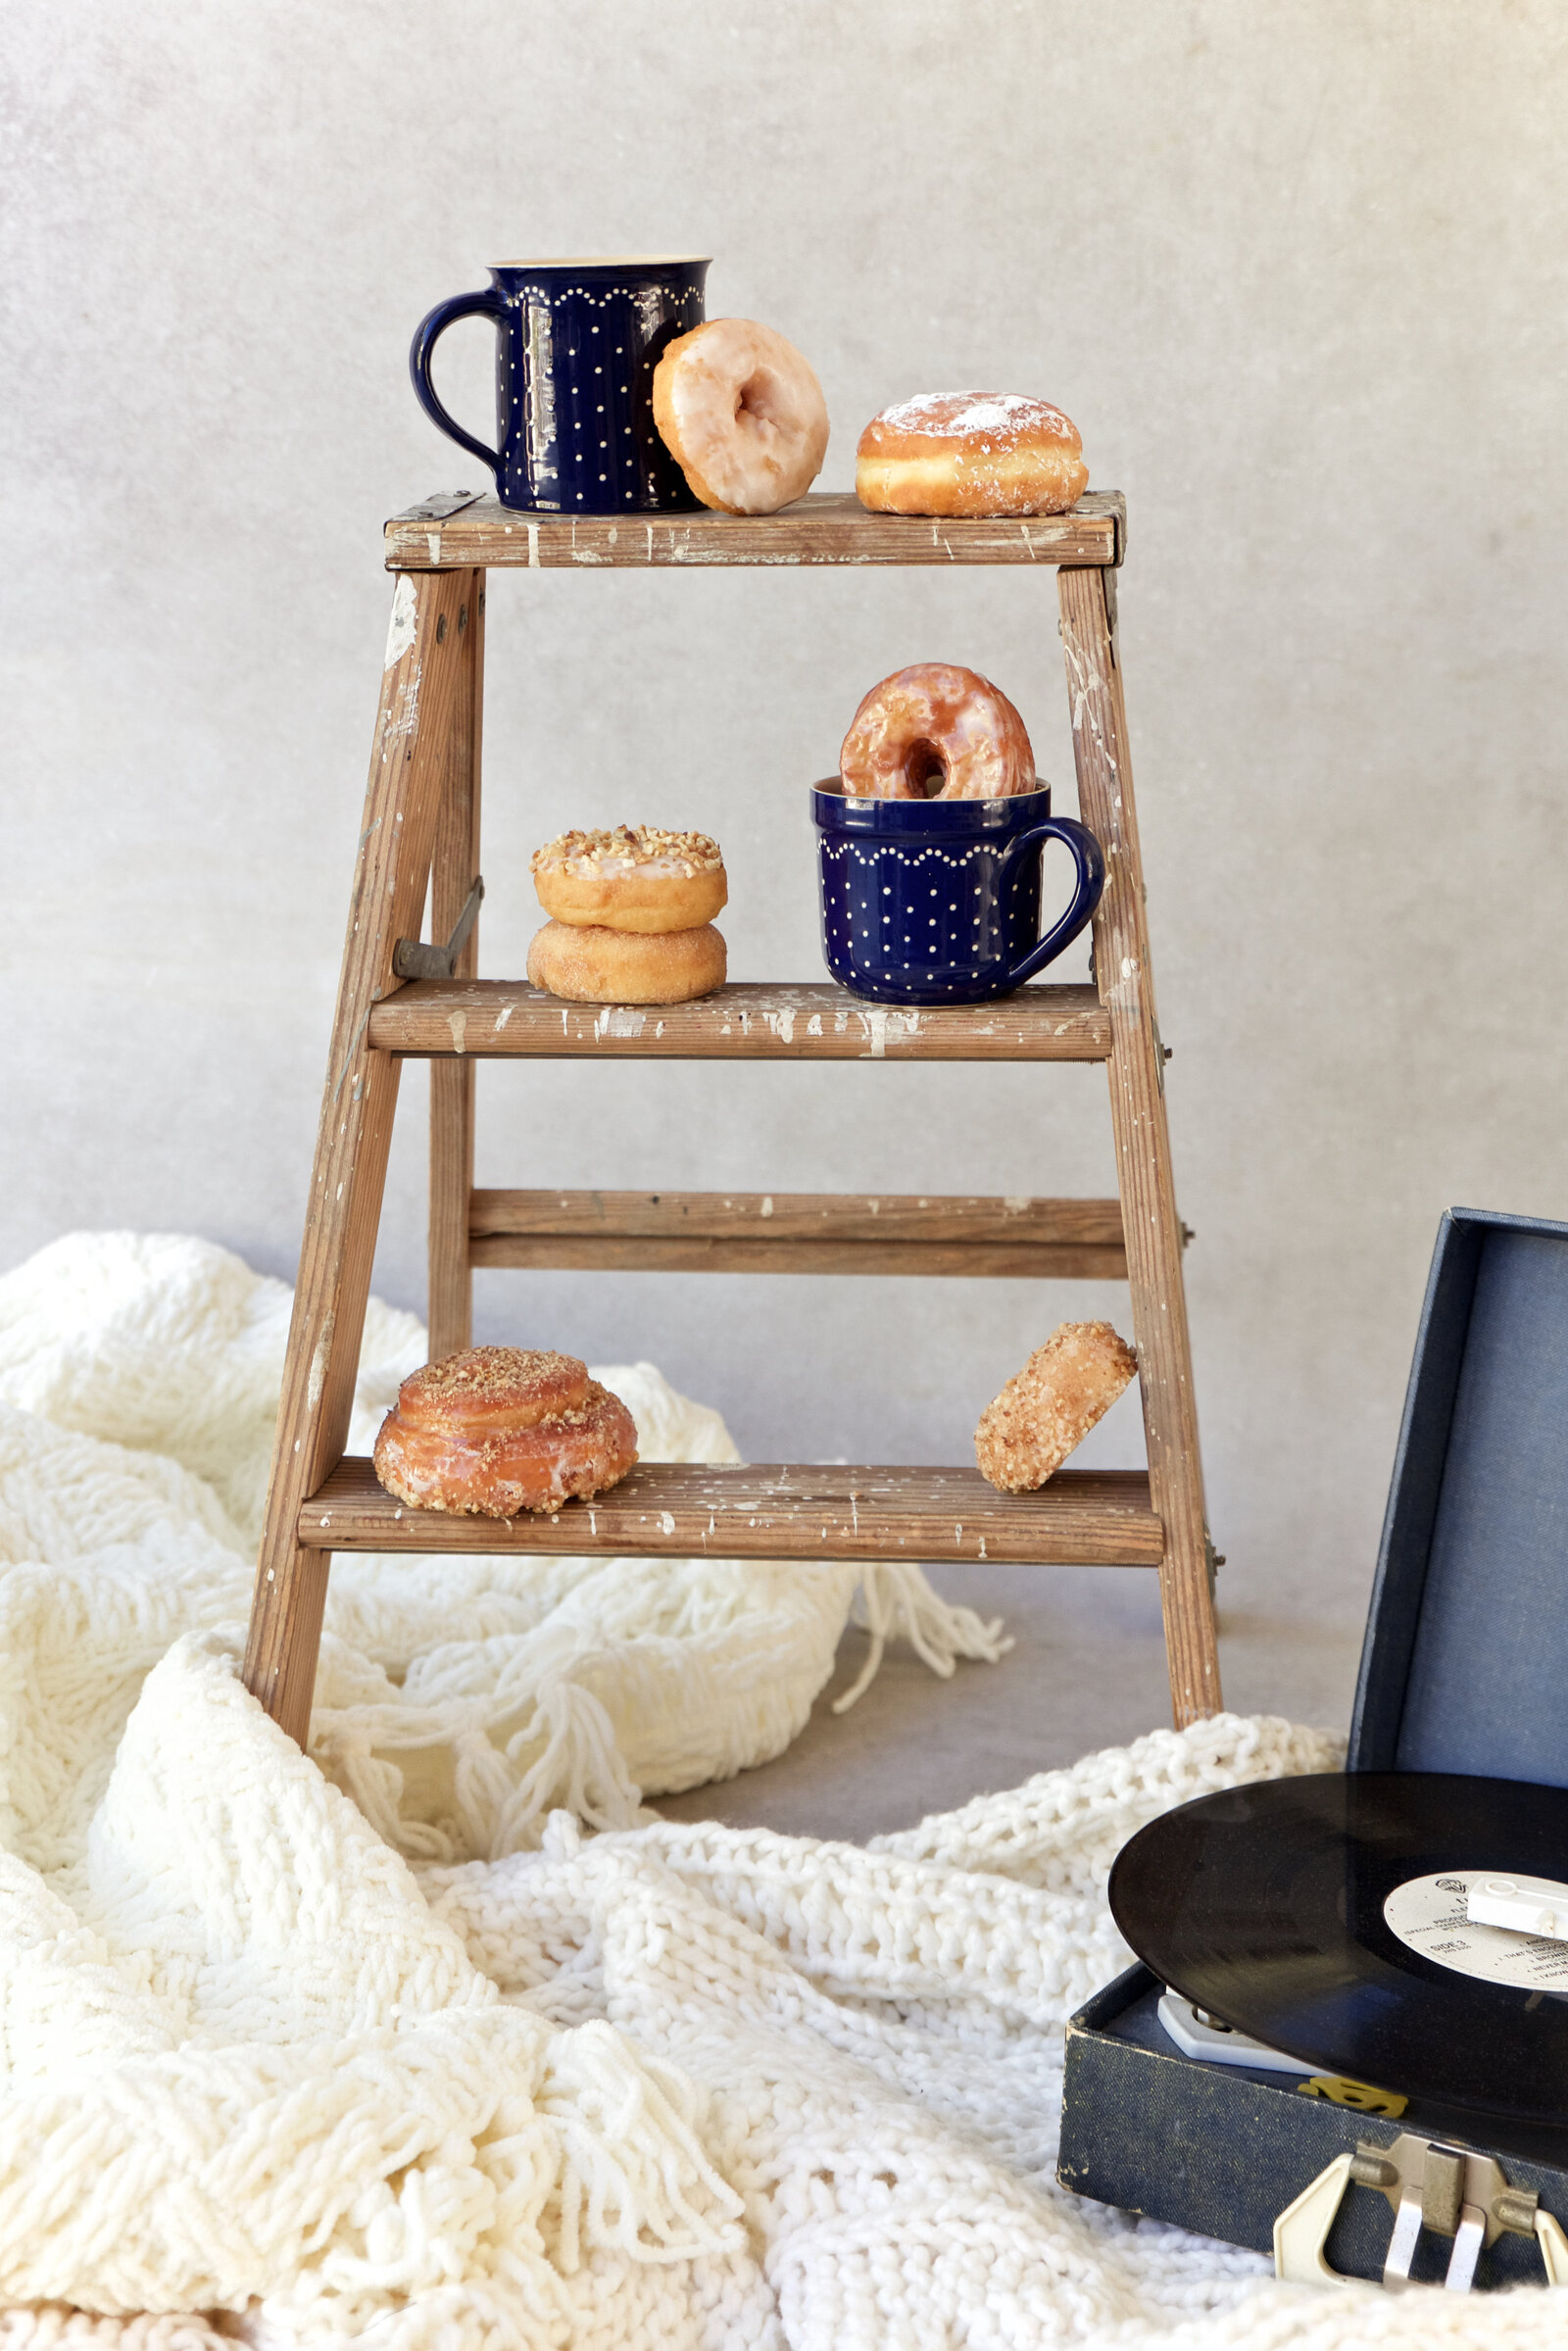 Rustic Ladder with Donuts and Etsy Coffee Mugs by Product Photographer Chelsea Loren